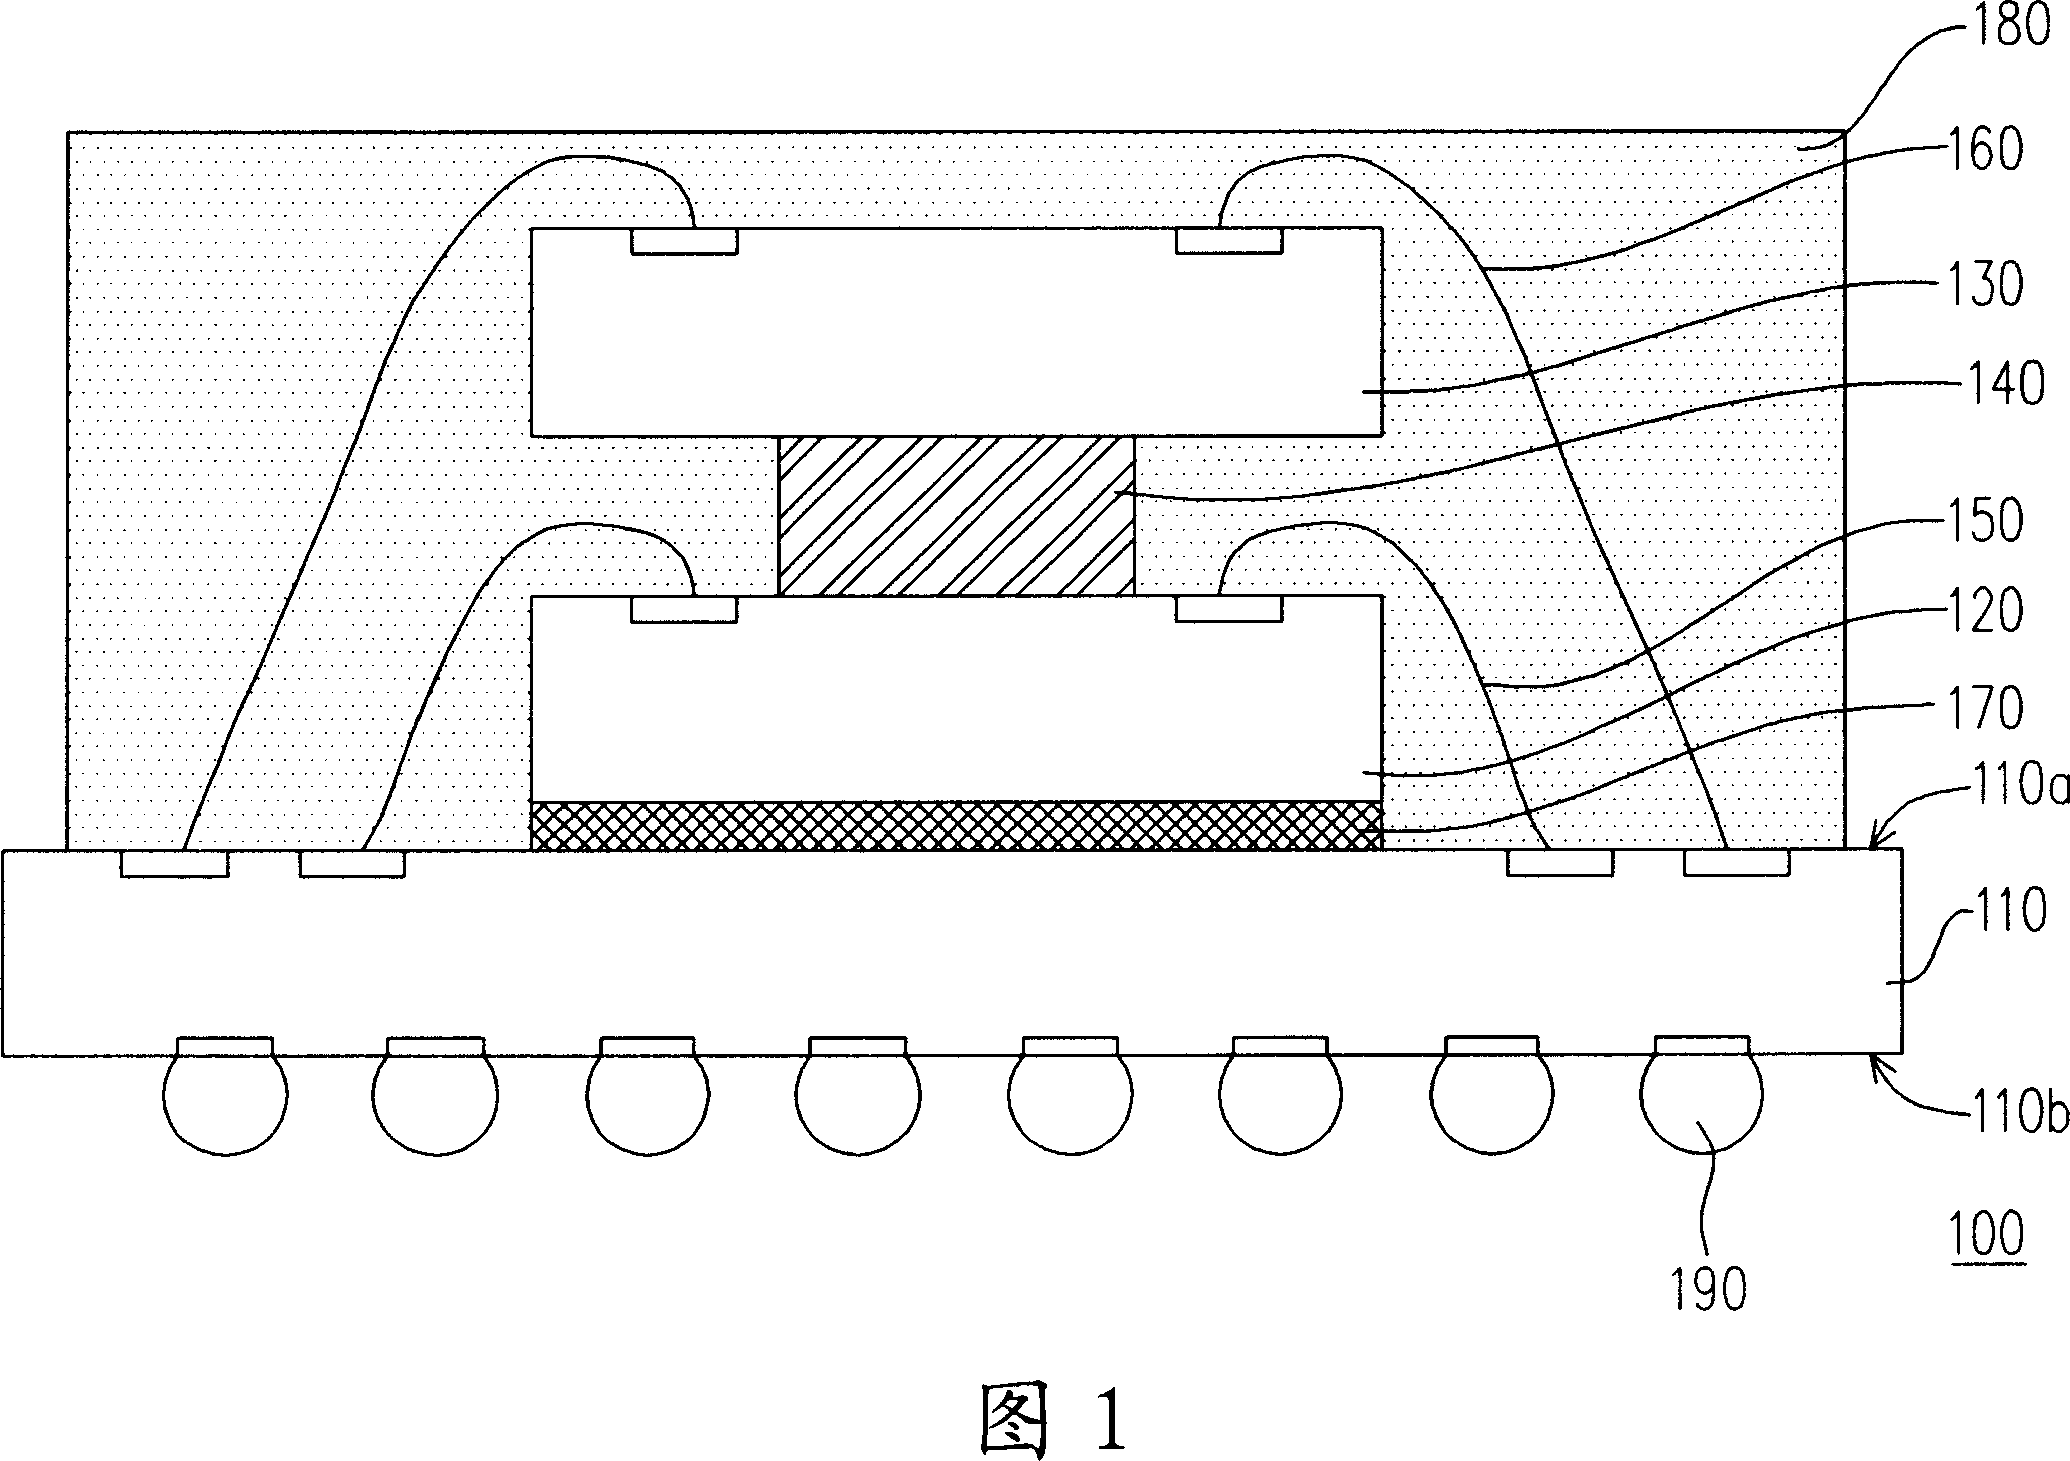 A stacking type wafer packaging structure